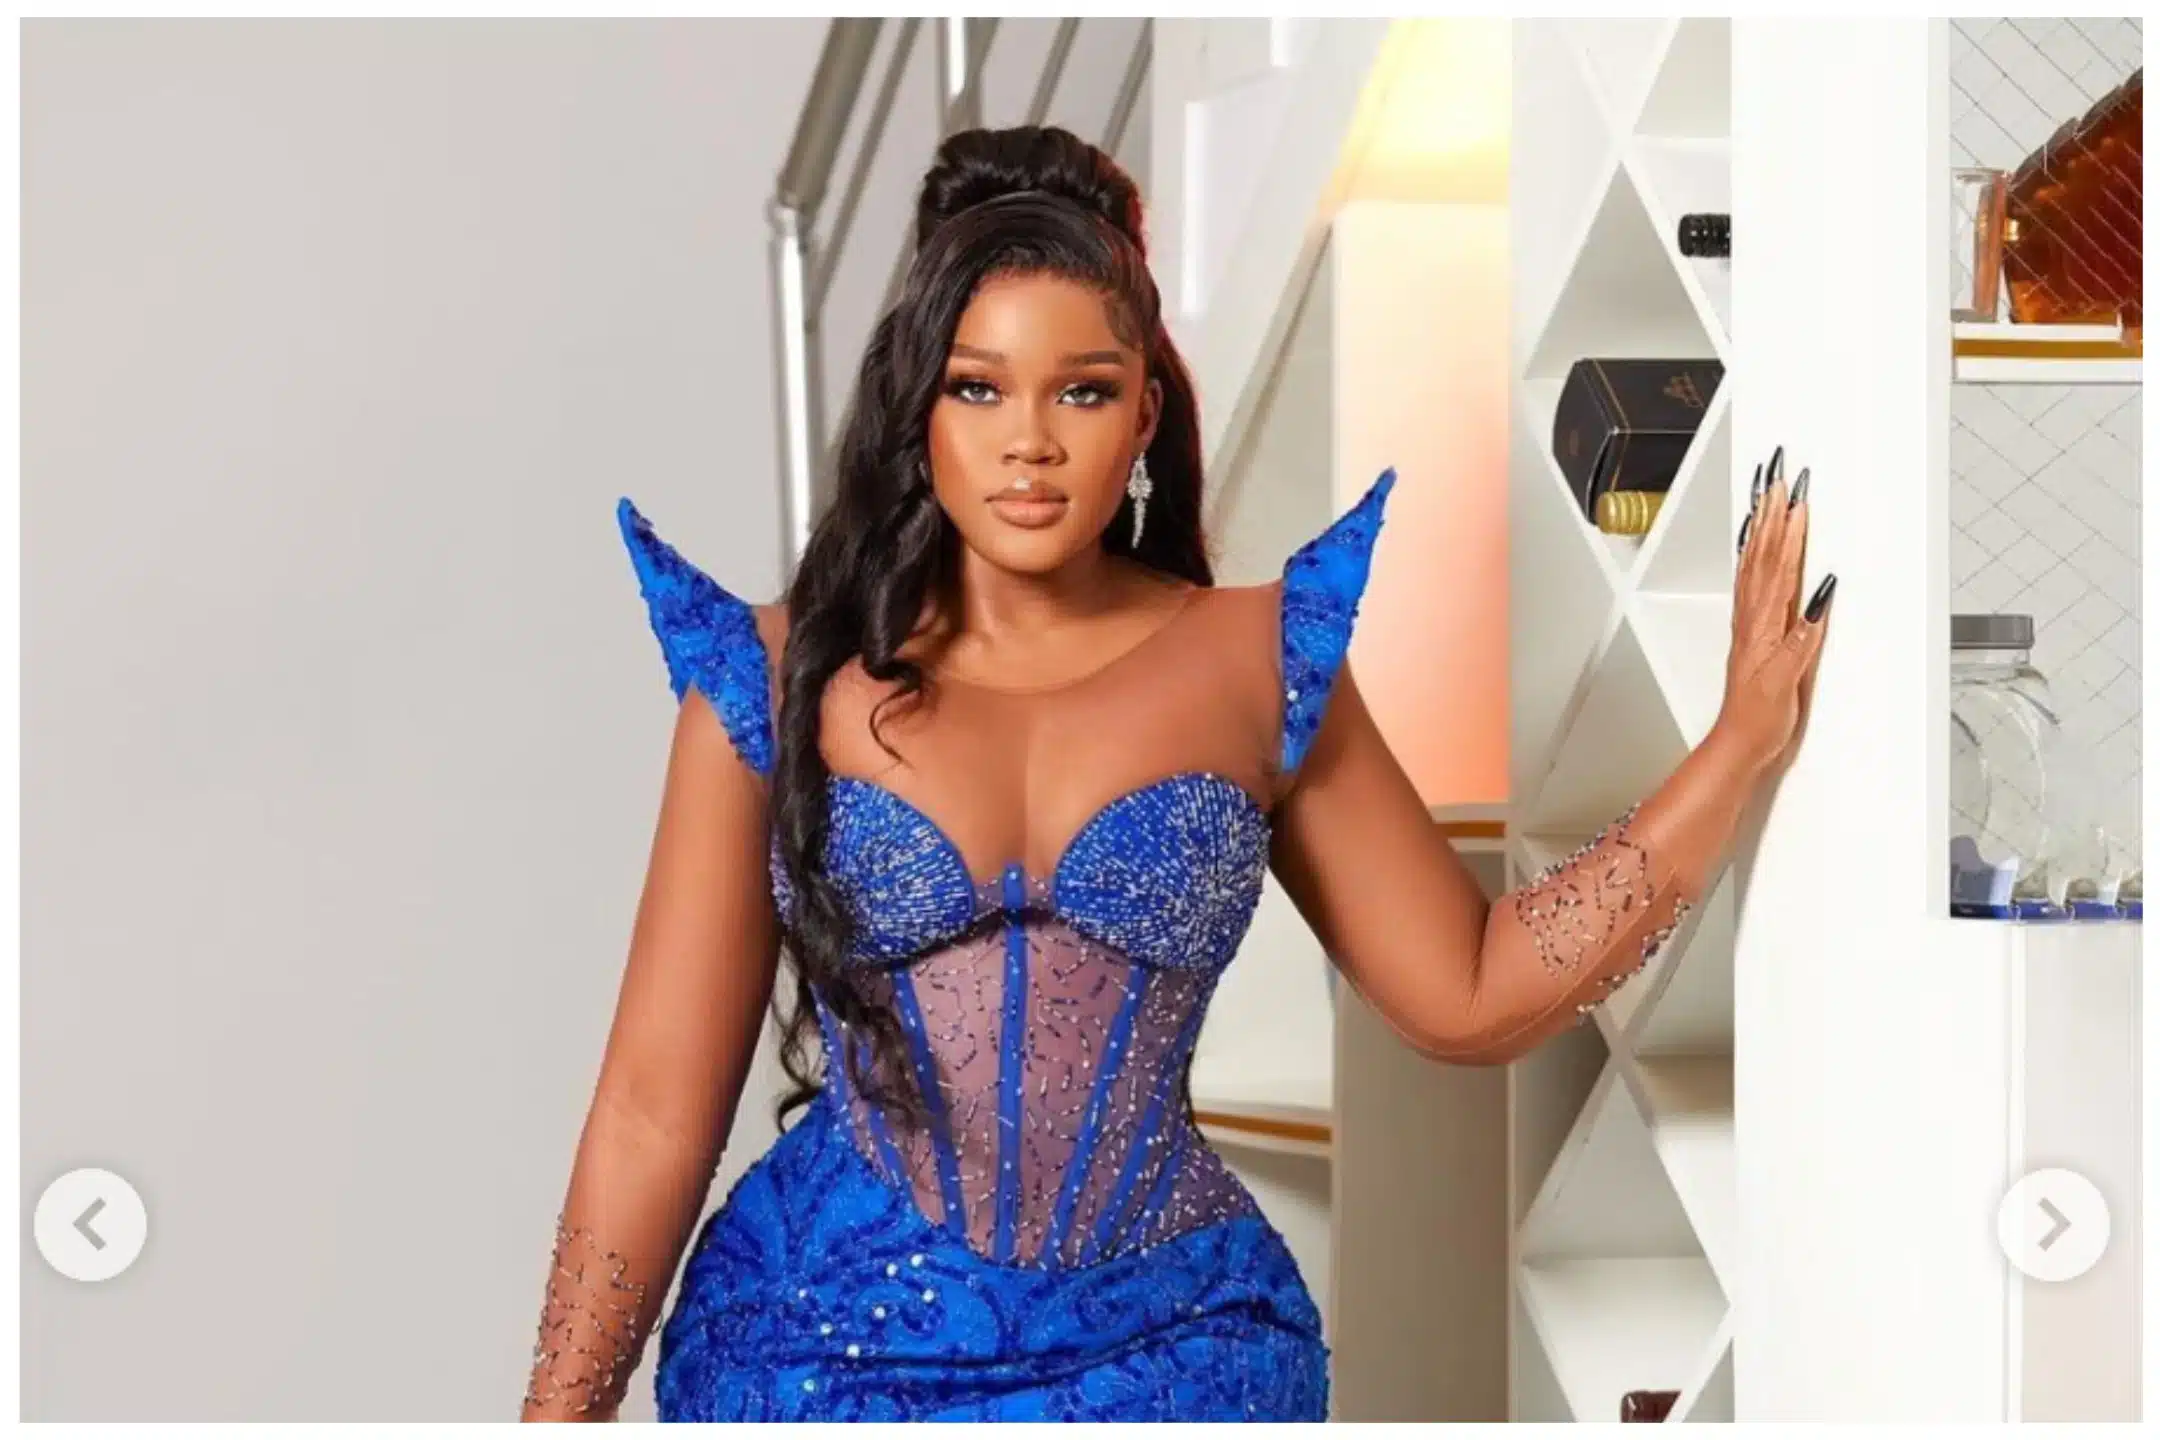 "I would’ve dated Neo if I were single" – Ceec